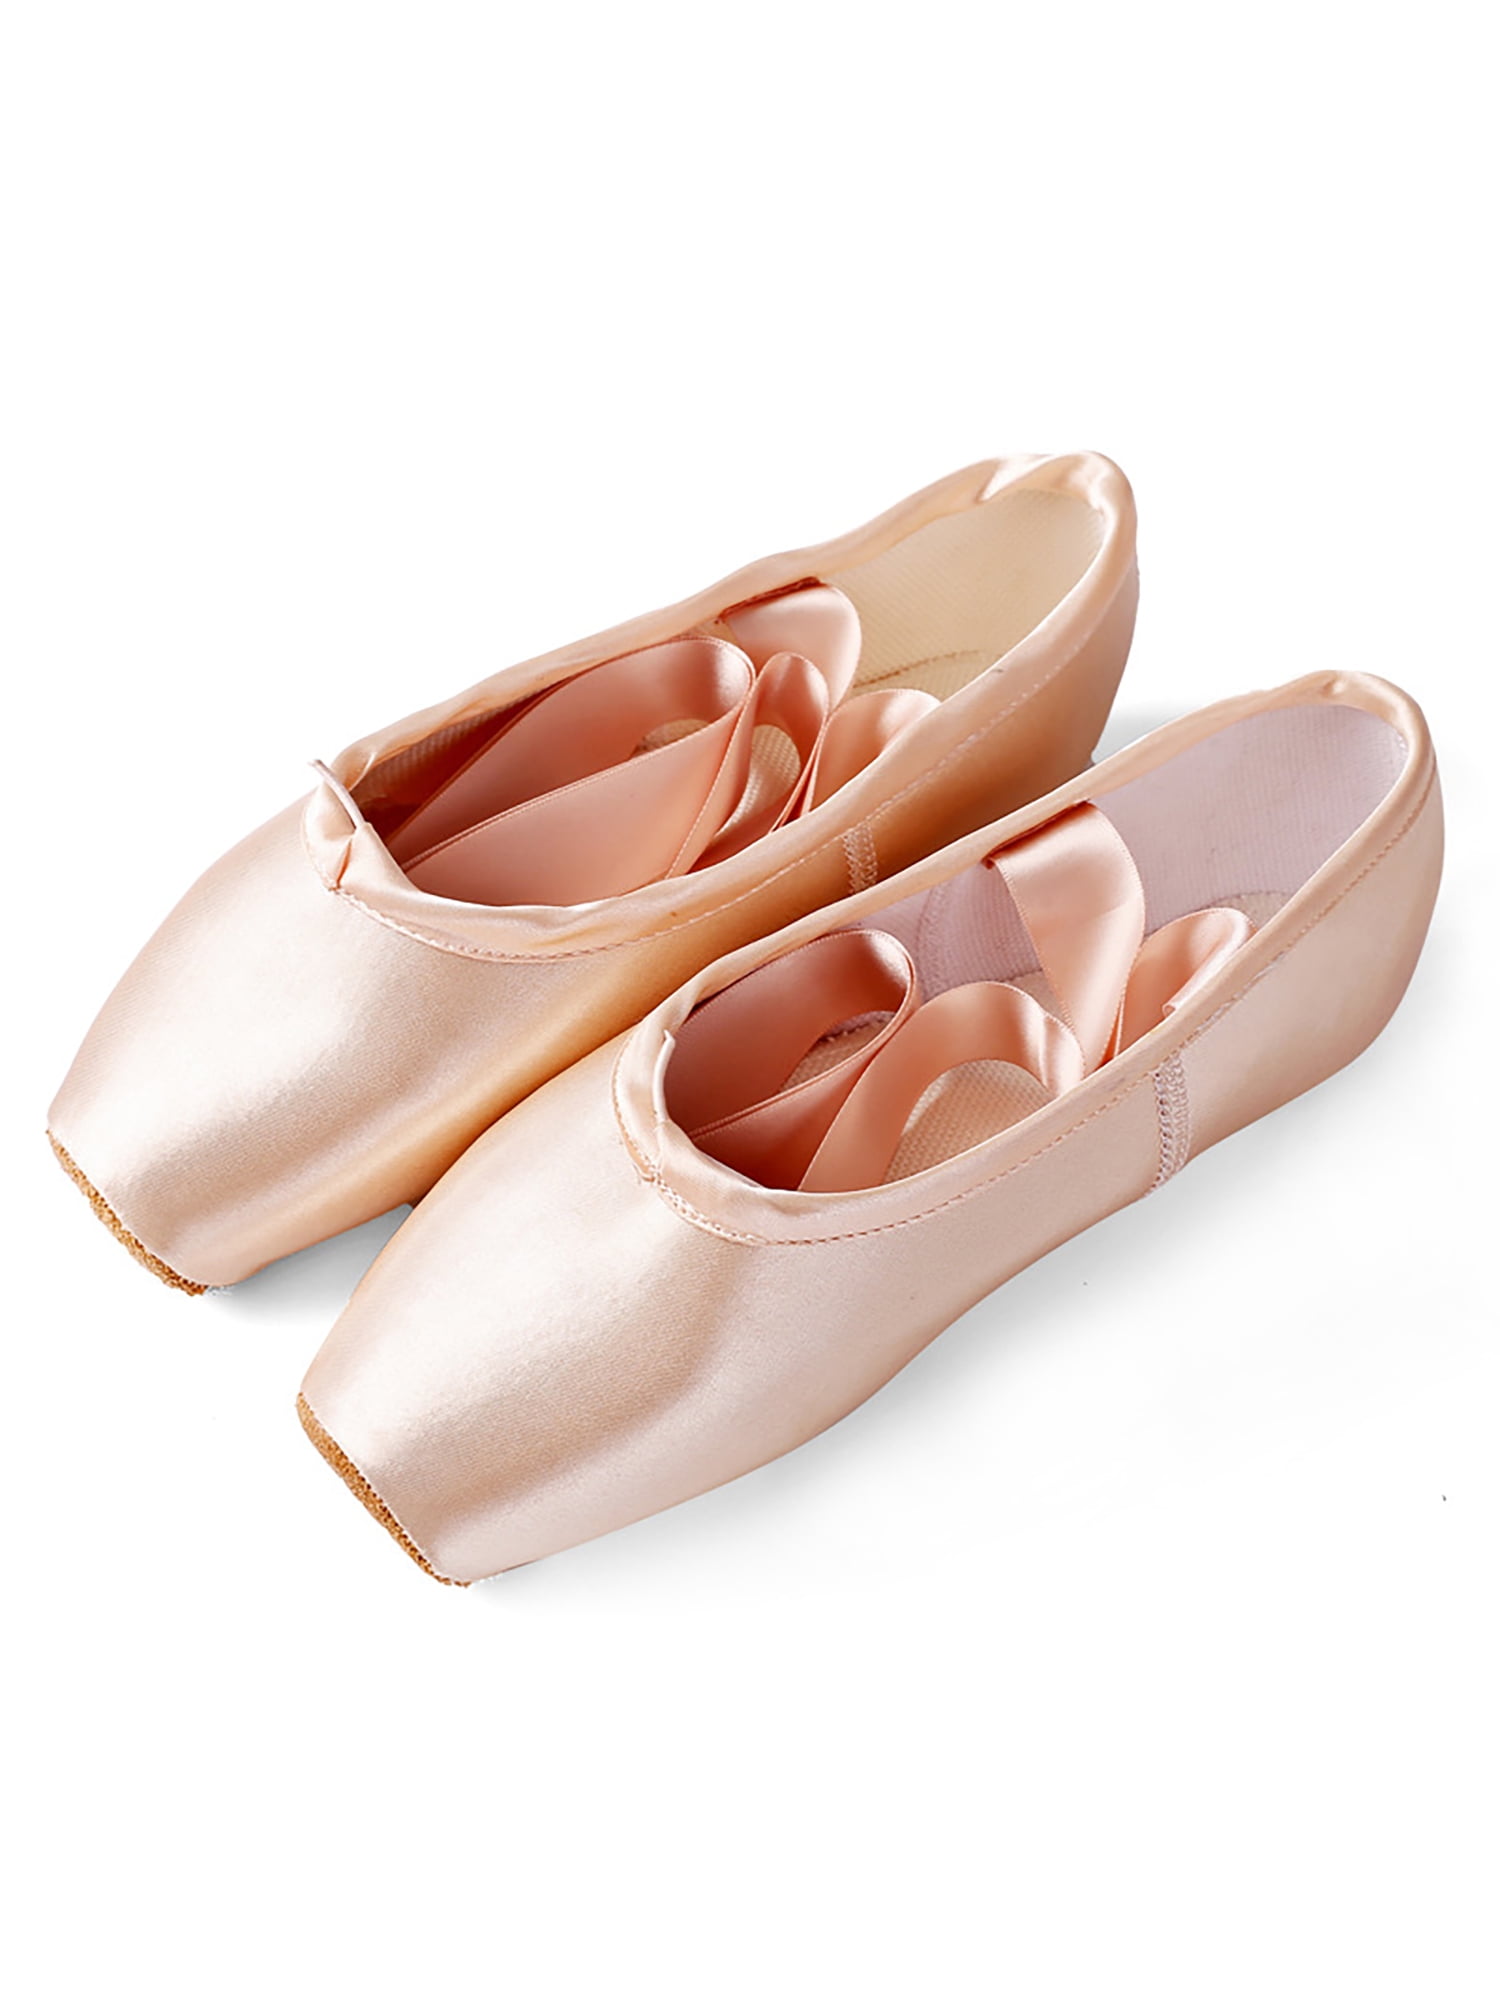 Kevin women's ballet pointe shoes size 8M pink satin brand new 